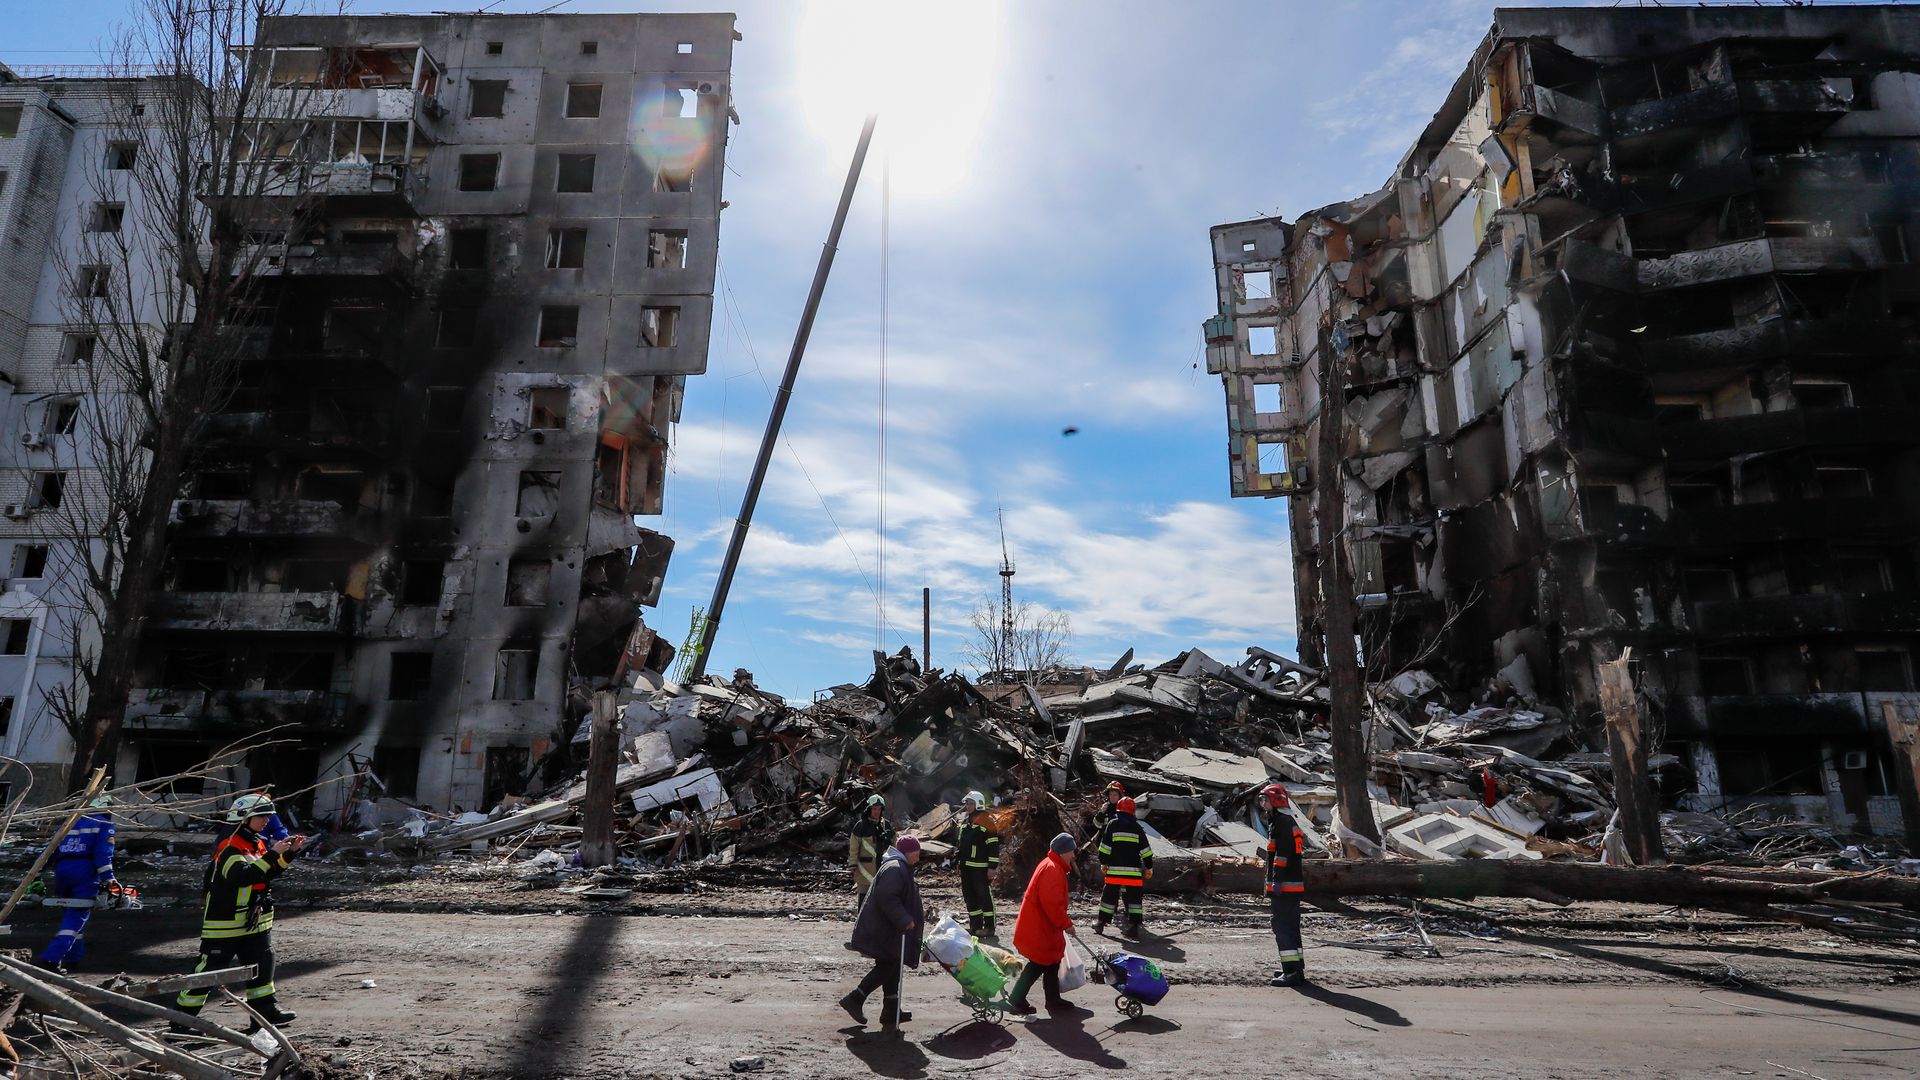 People sift through collapsed buildings and debris in a suburb of Kyiv